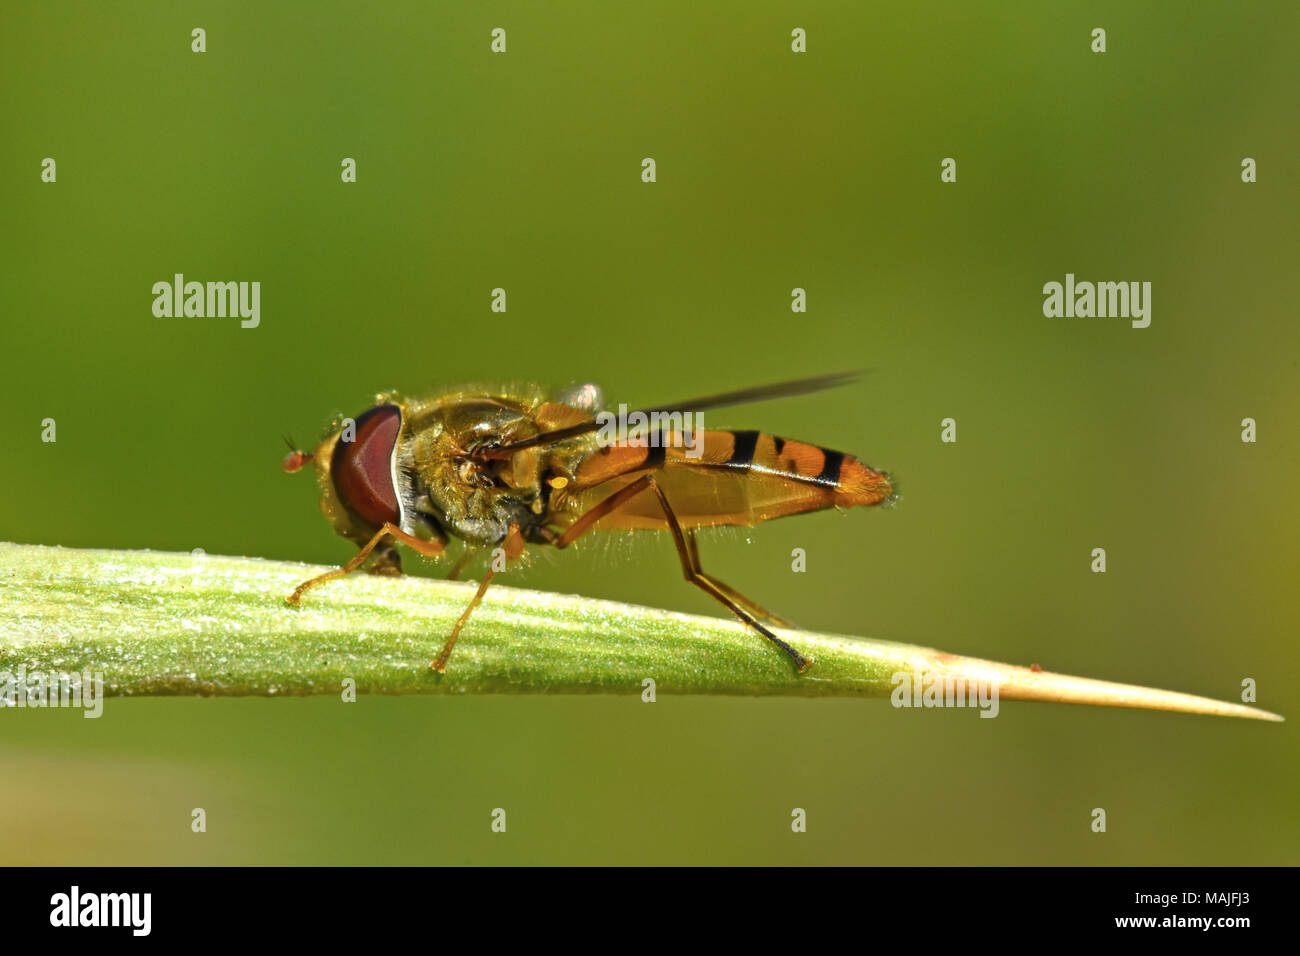 Hover fly on thorn Stock Photo